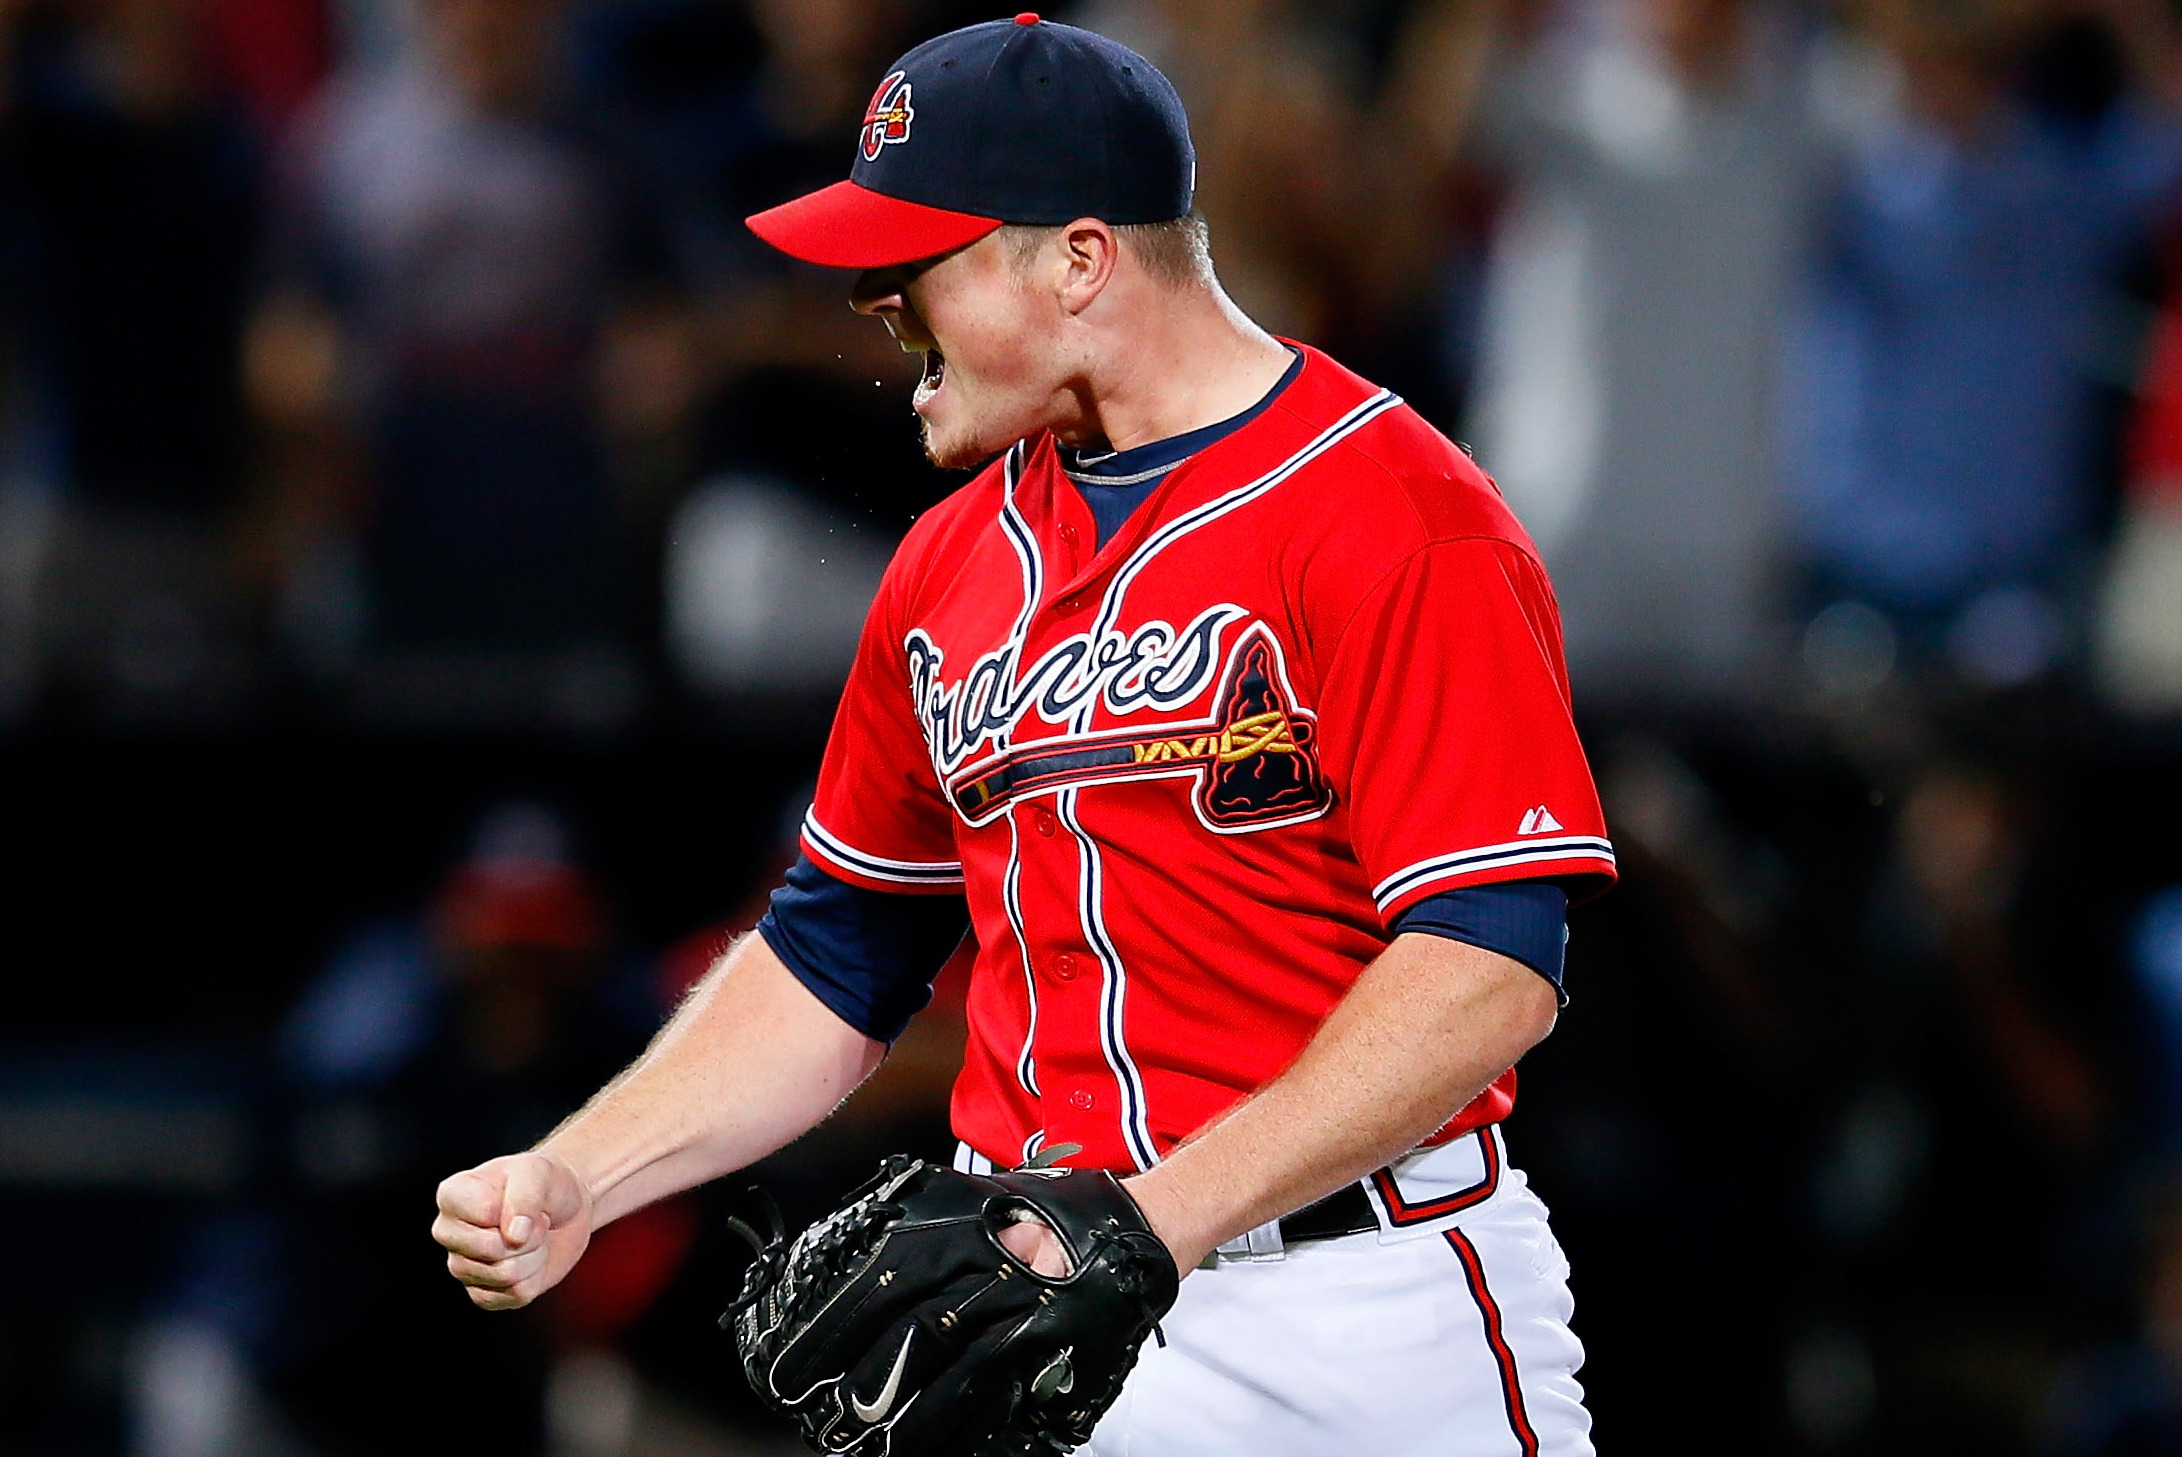 Craig Kimbrel 8th pitcher in MLB history to earn 400 saves, Phillies beat  Braves 6-4 - Washington Times